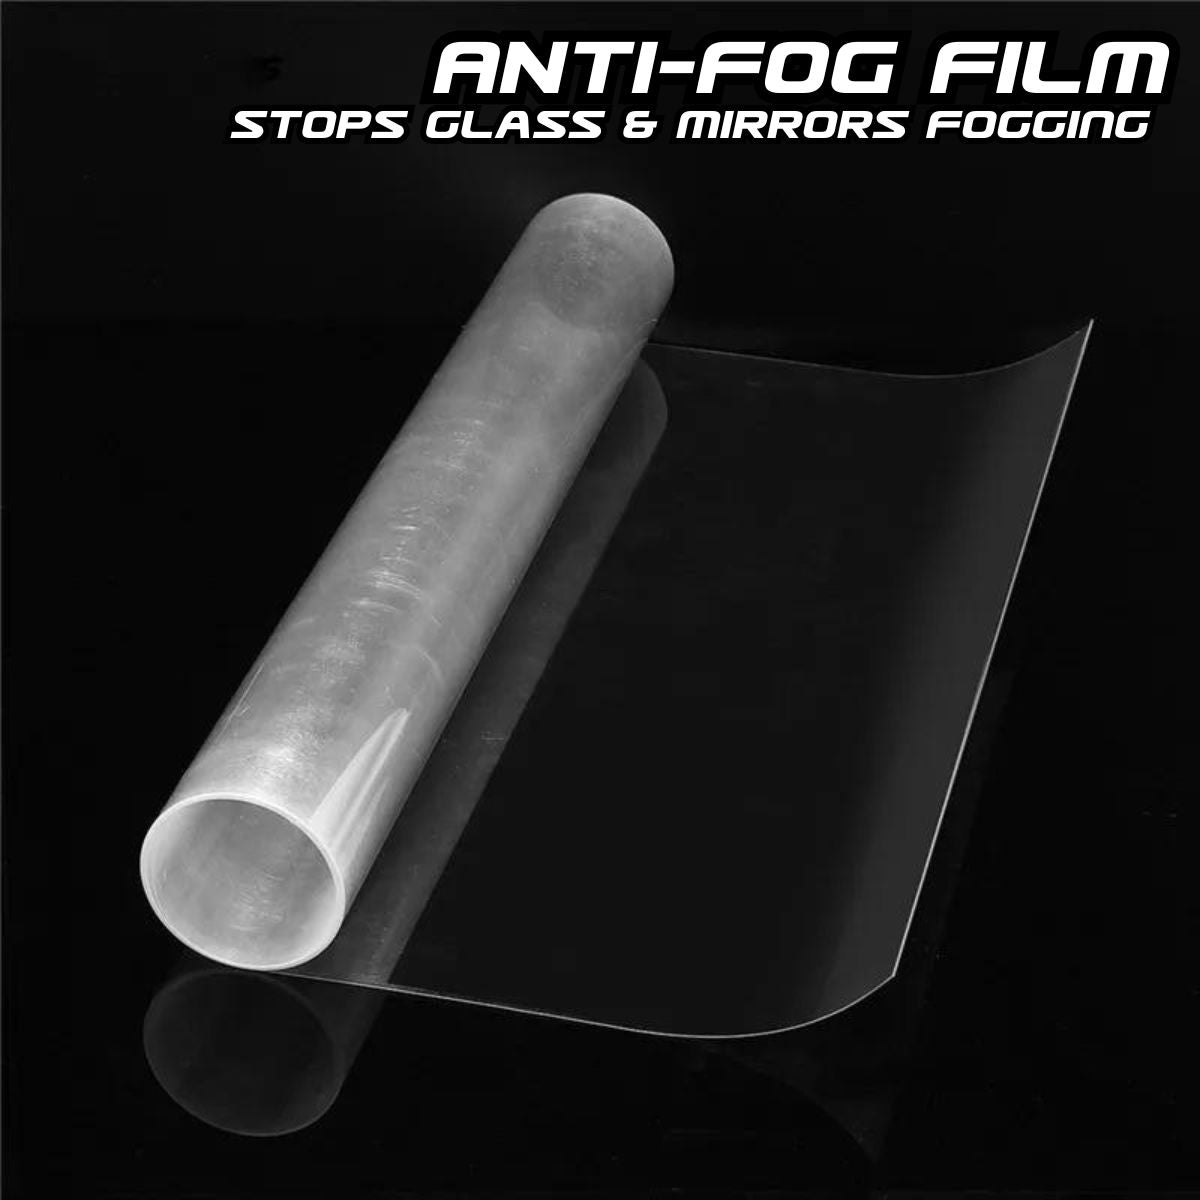 Anti Fog Film for glass & mirrors,  8" x 24" (20.32cm x 61cm) - South East Clearance Centre